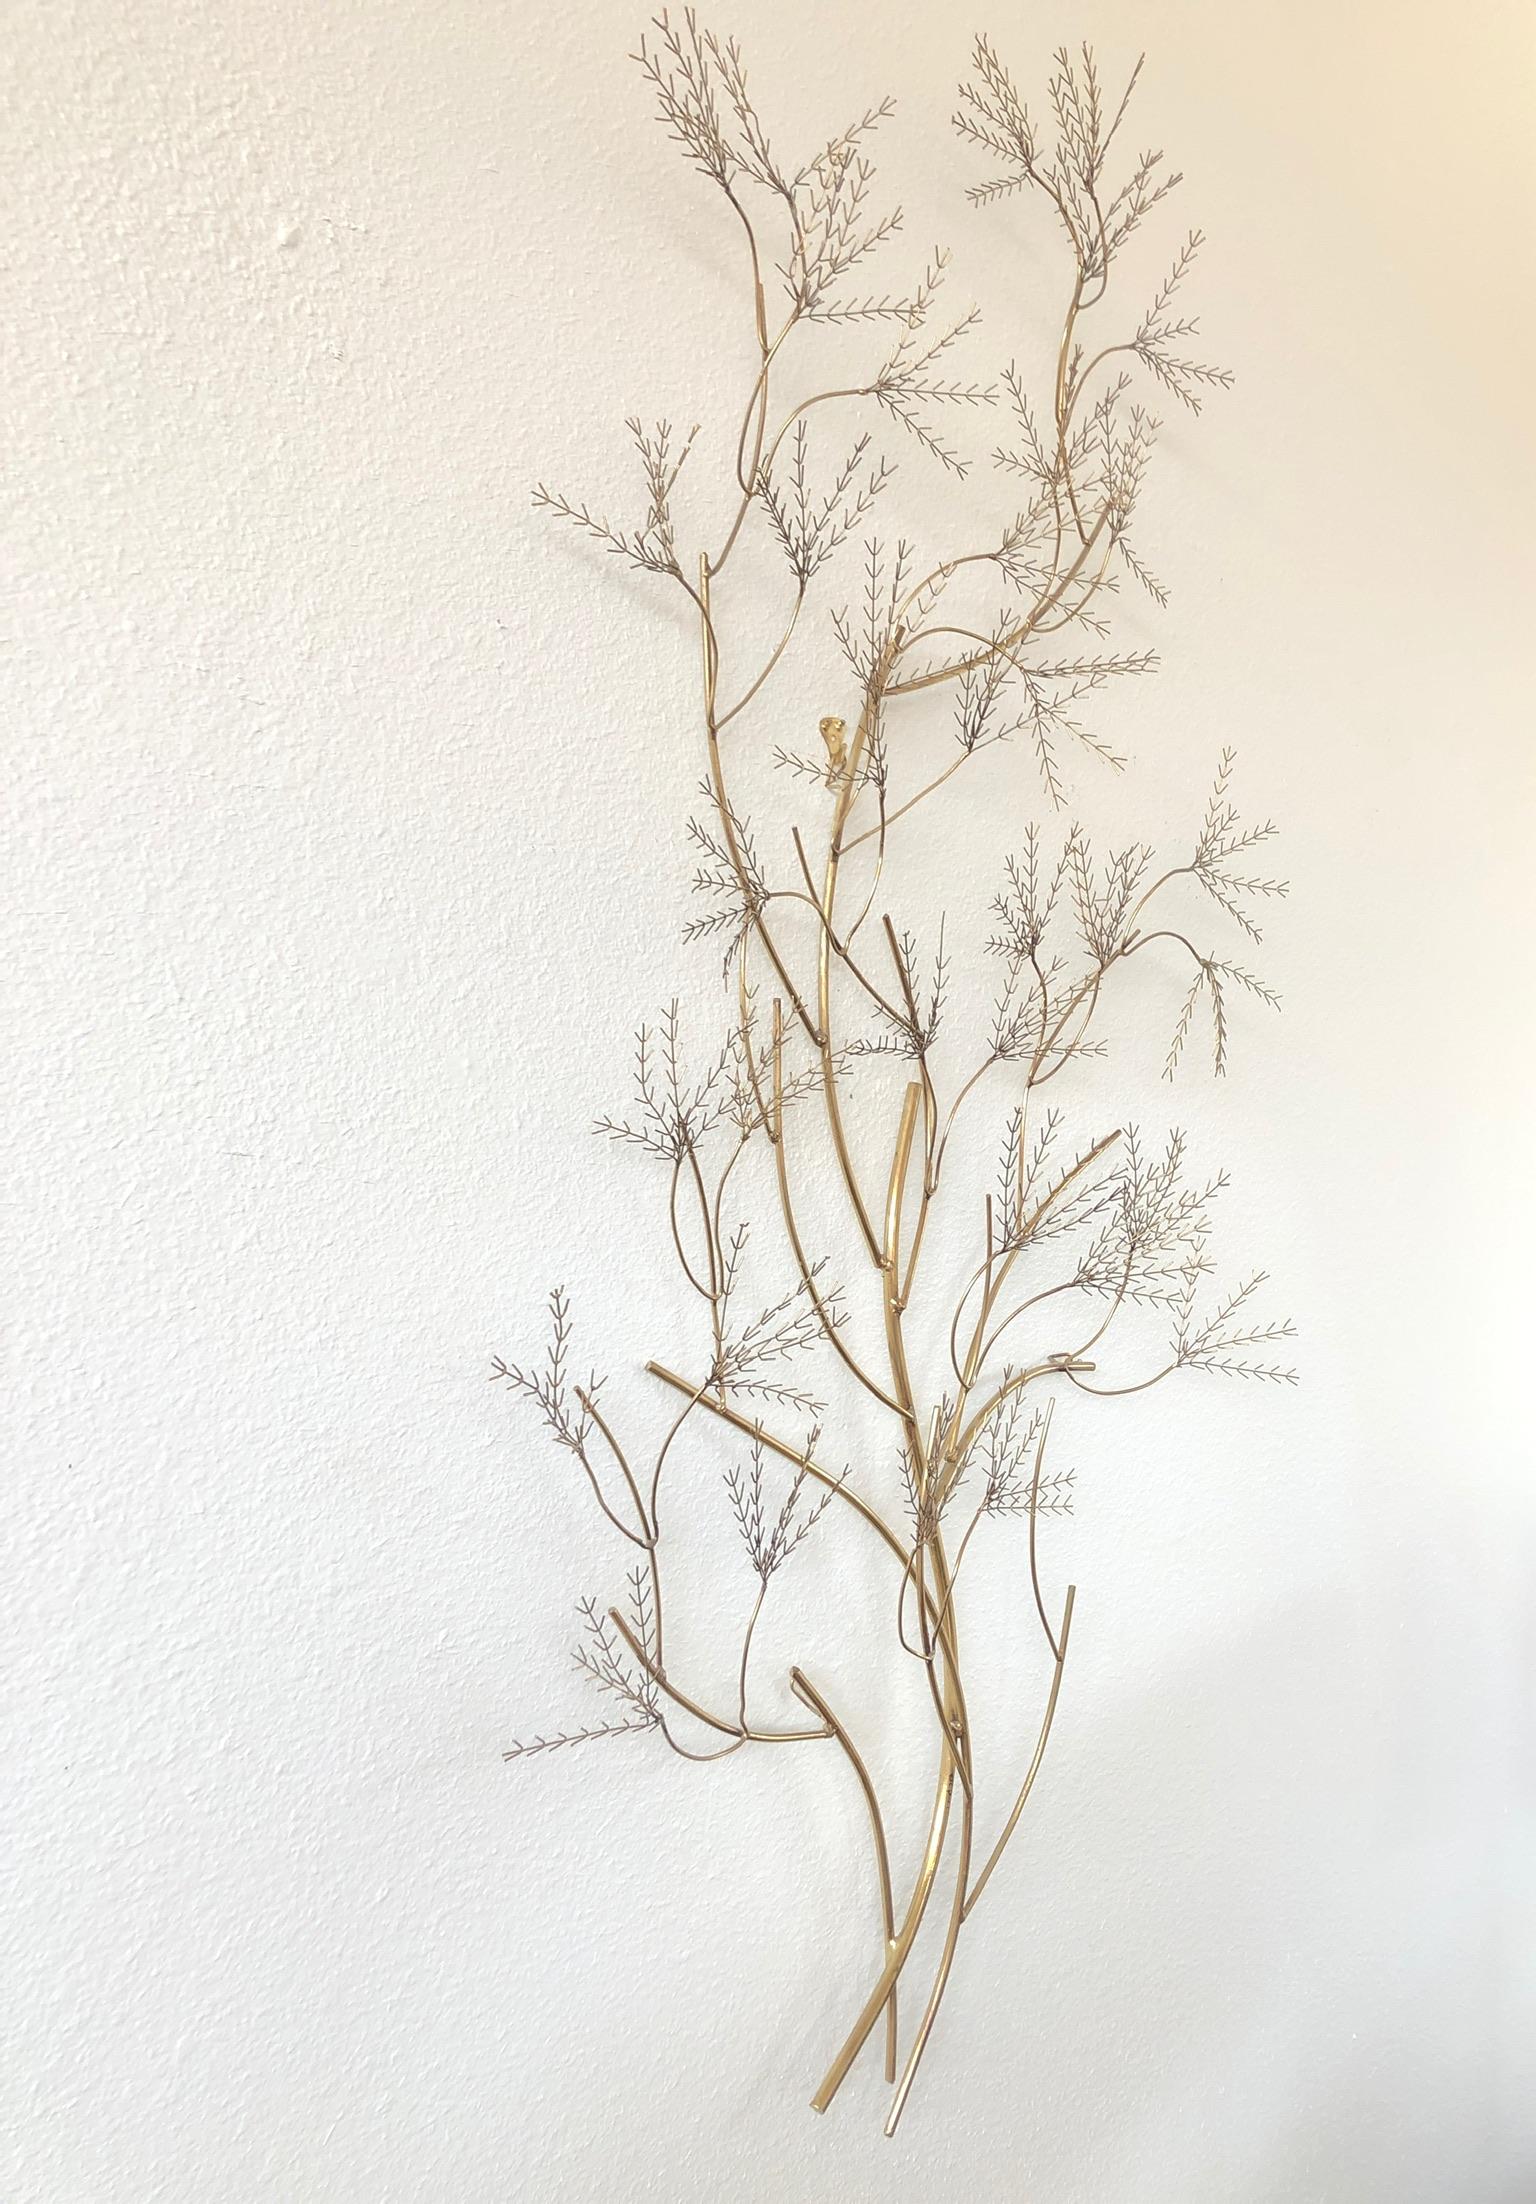 1977 brass tree branch wall sculpture by Curtis Jeré. 
Signed and dated.
Measurements: 55” High, 28” Wide and 6” Deep.